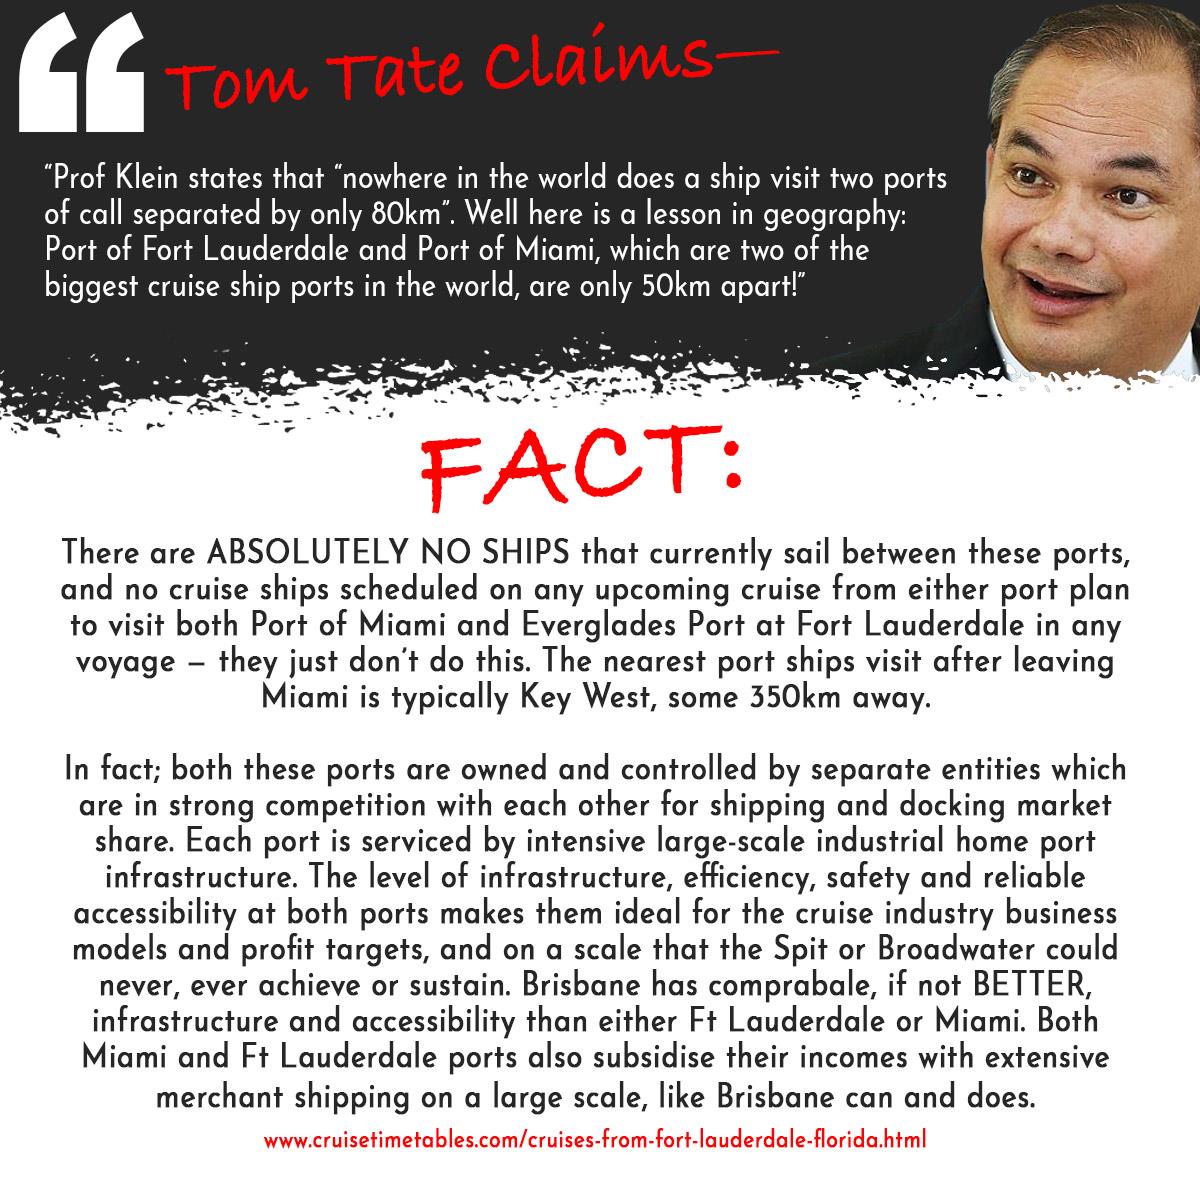 Tom Tate Claims re port cannibalism